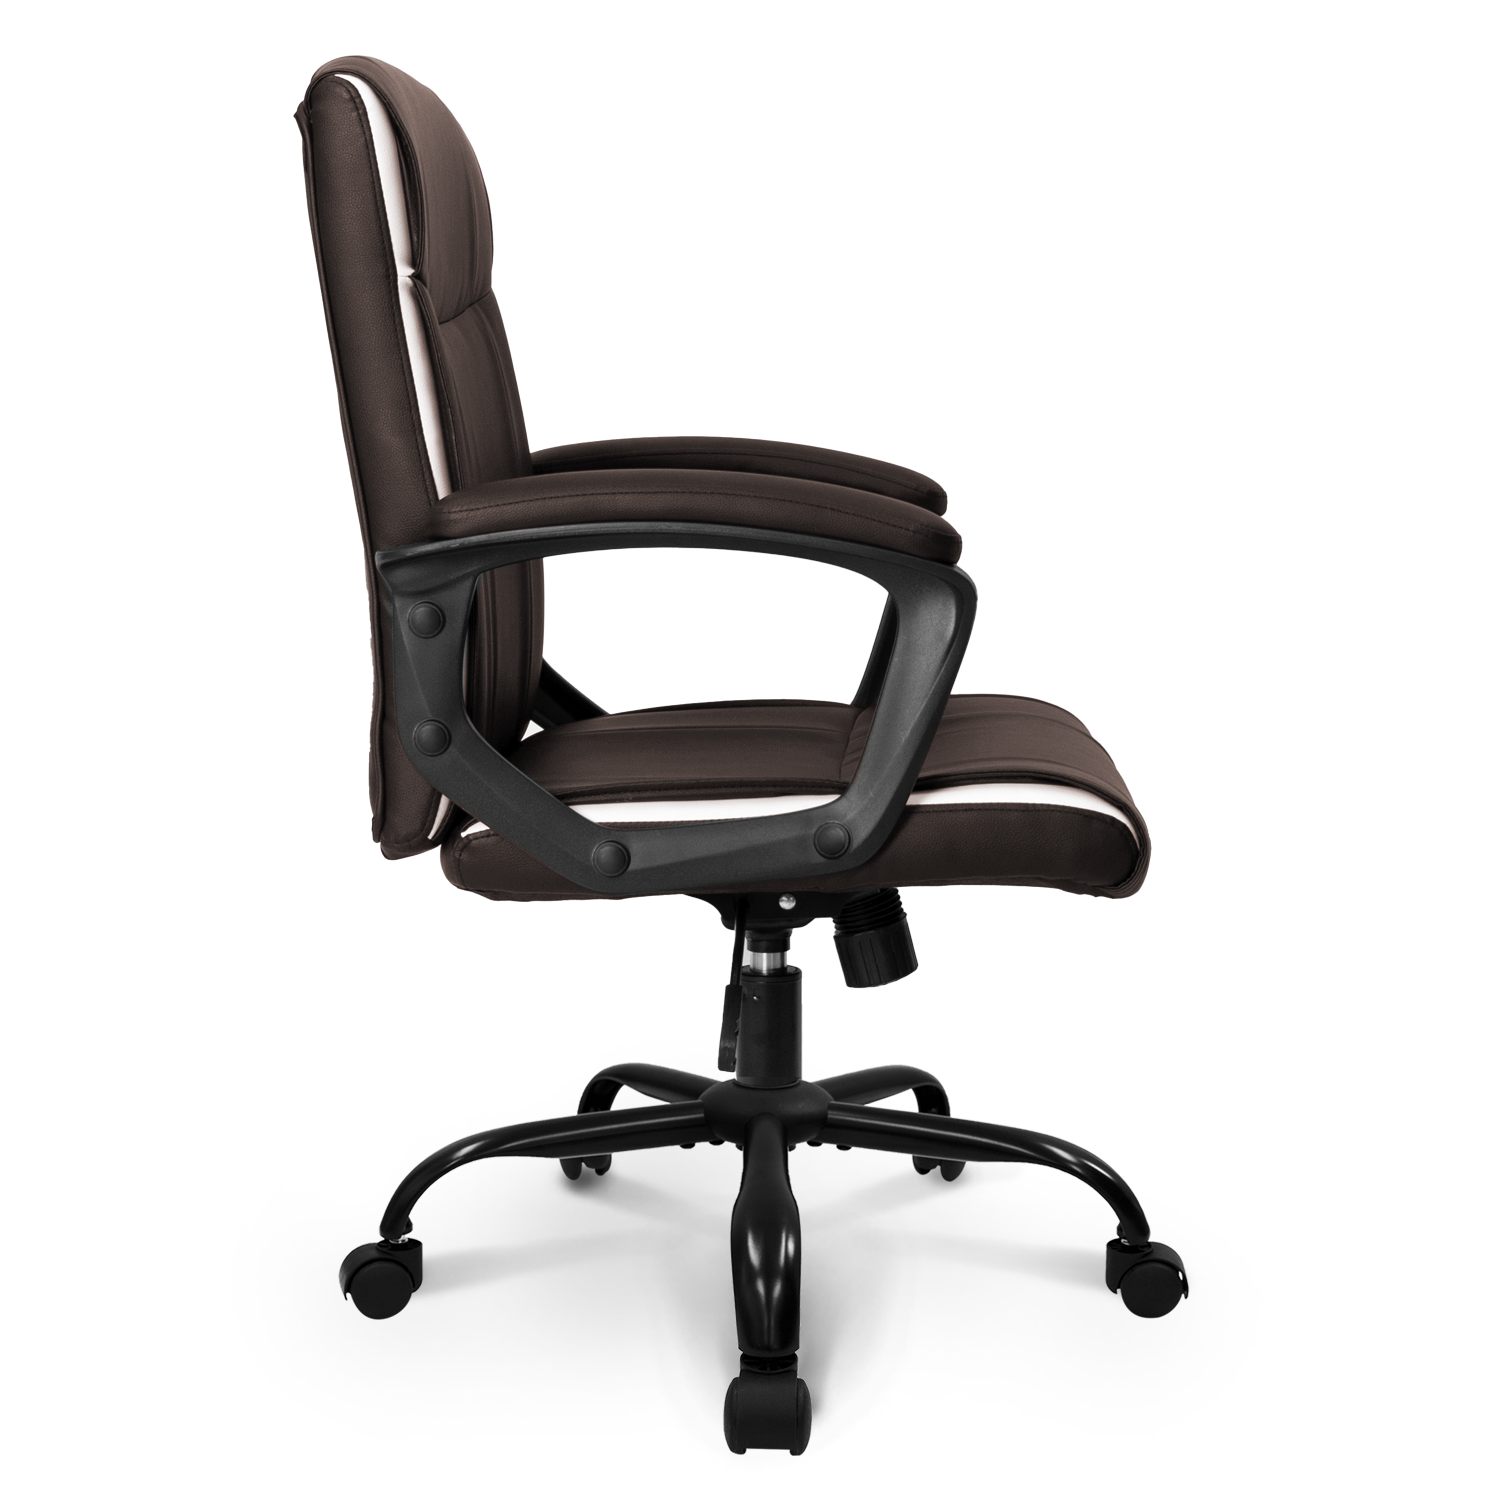 PAC Mid Back Classic Executive Chair